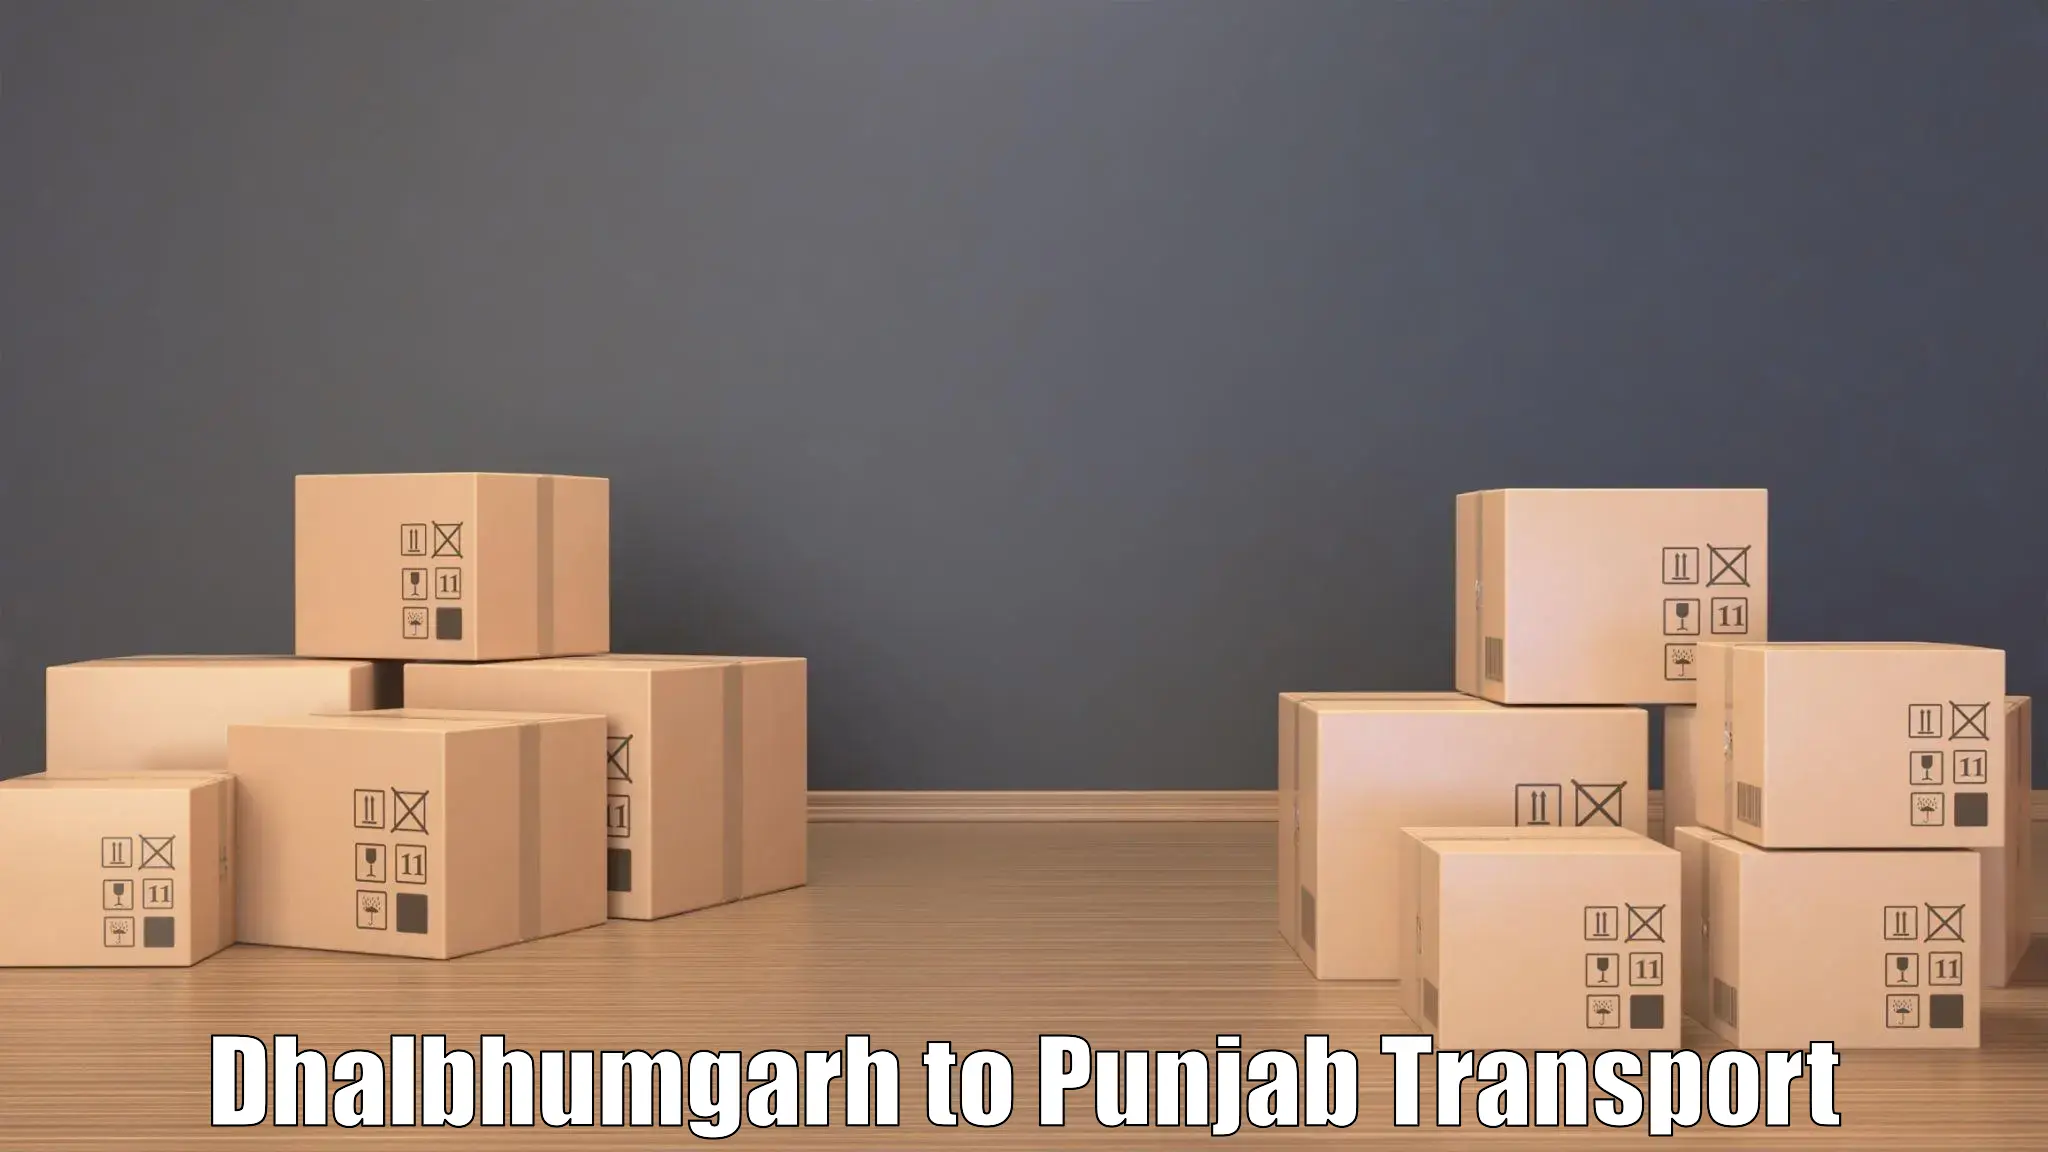 Container transportation services Dhalbhumgarh to Thapar Institute of Engineering and Technology Patiala